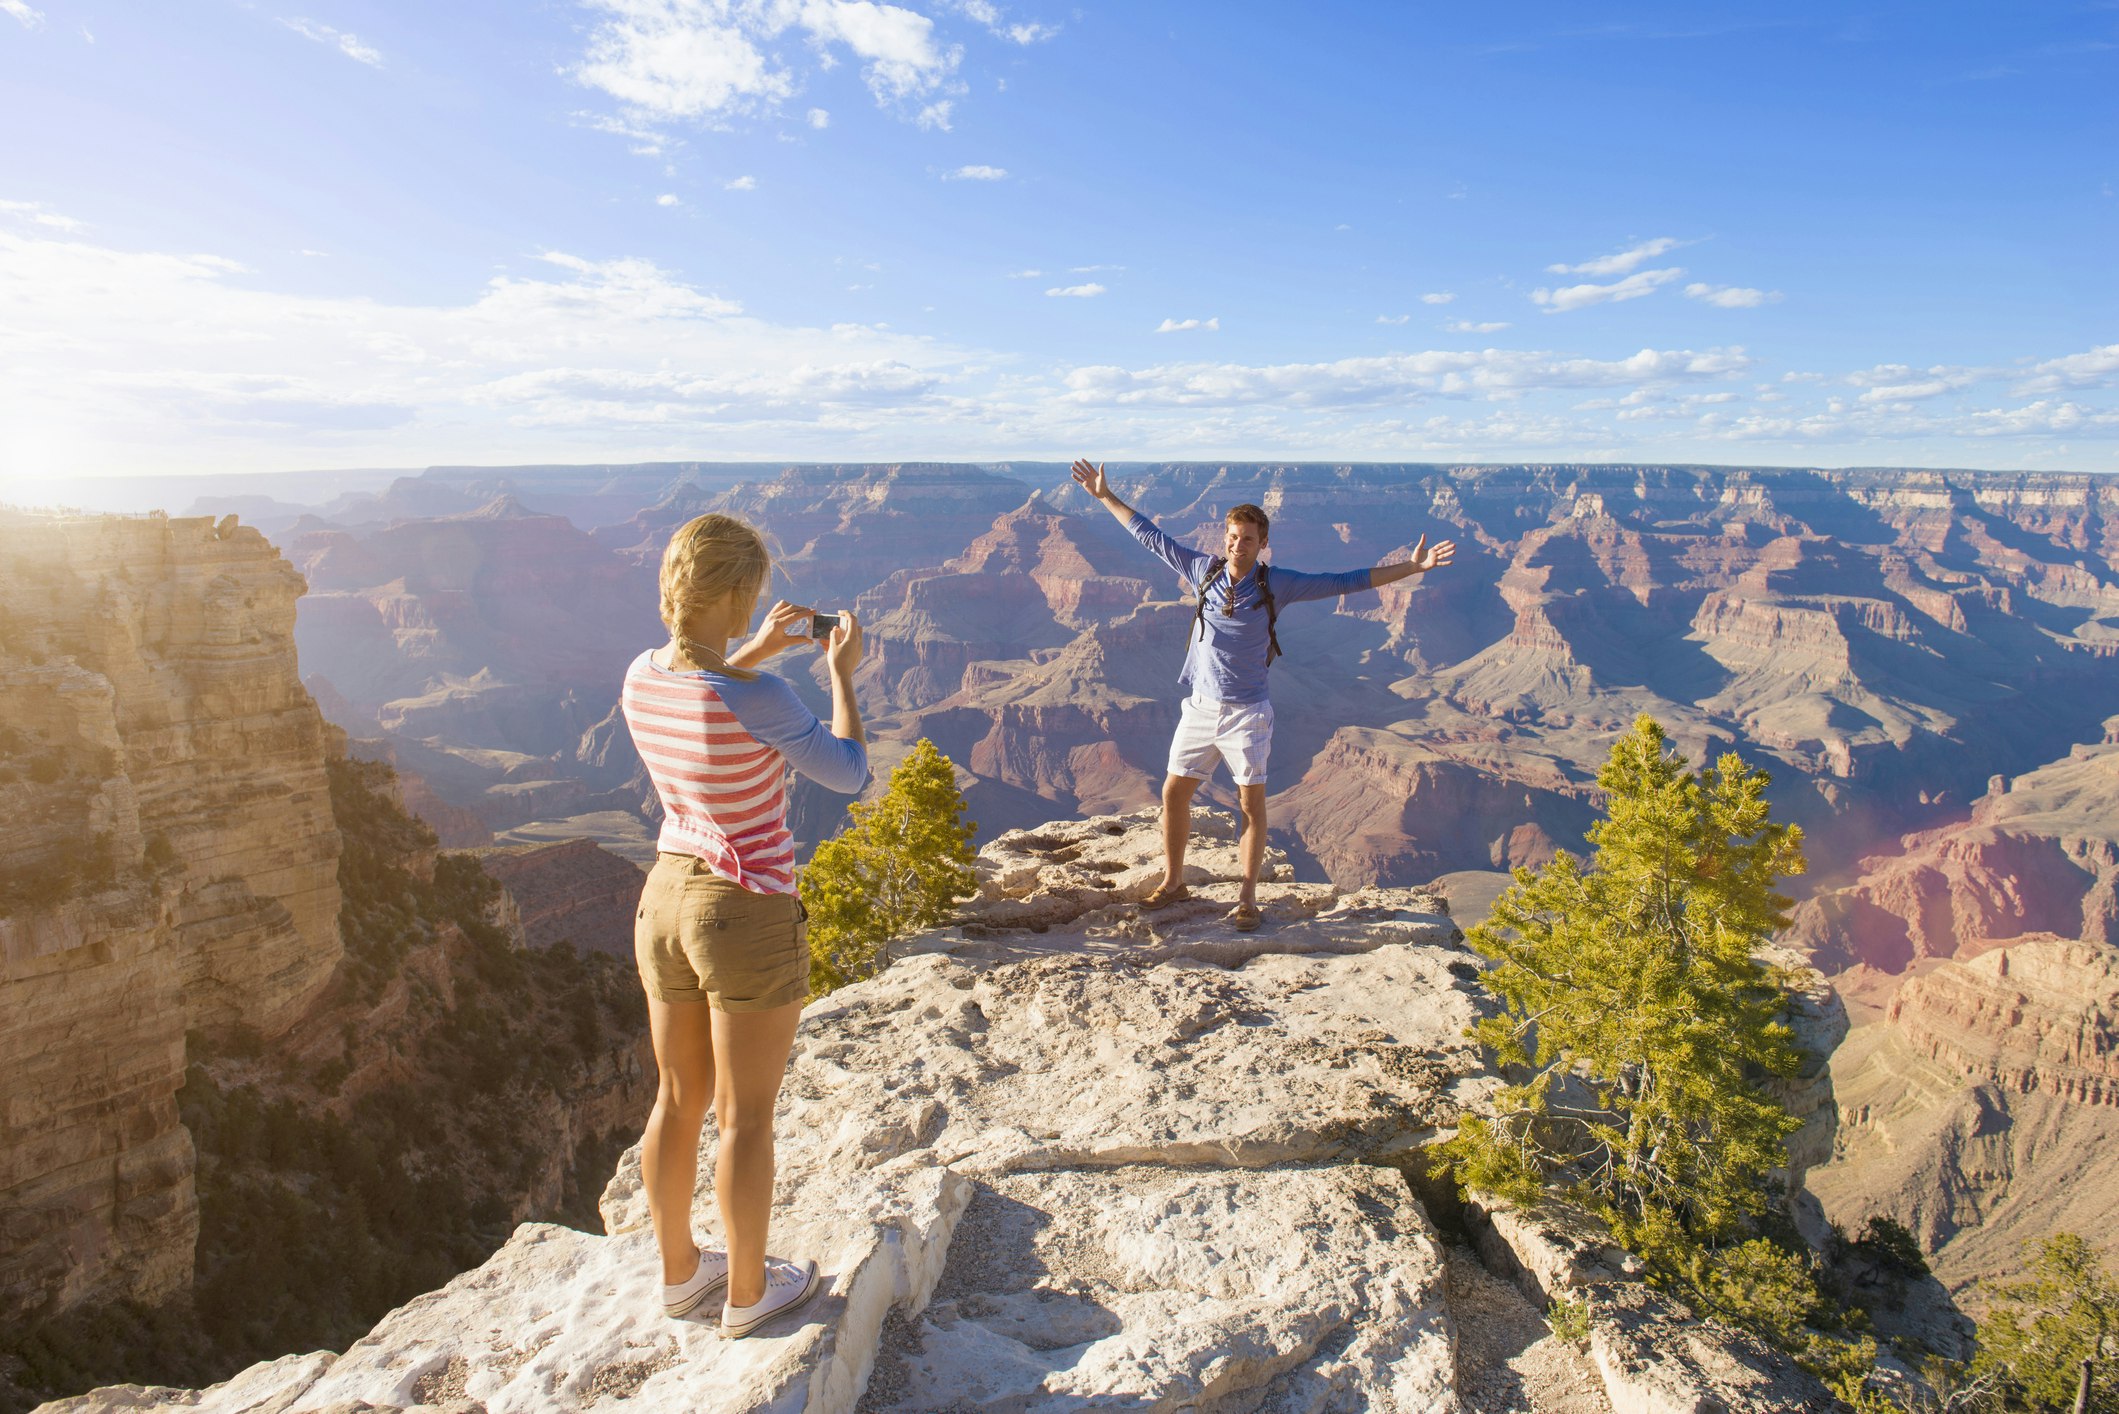 A picture of a woman snapping a picture of a man in front of a canyon